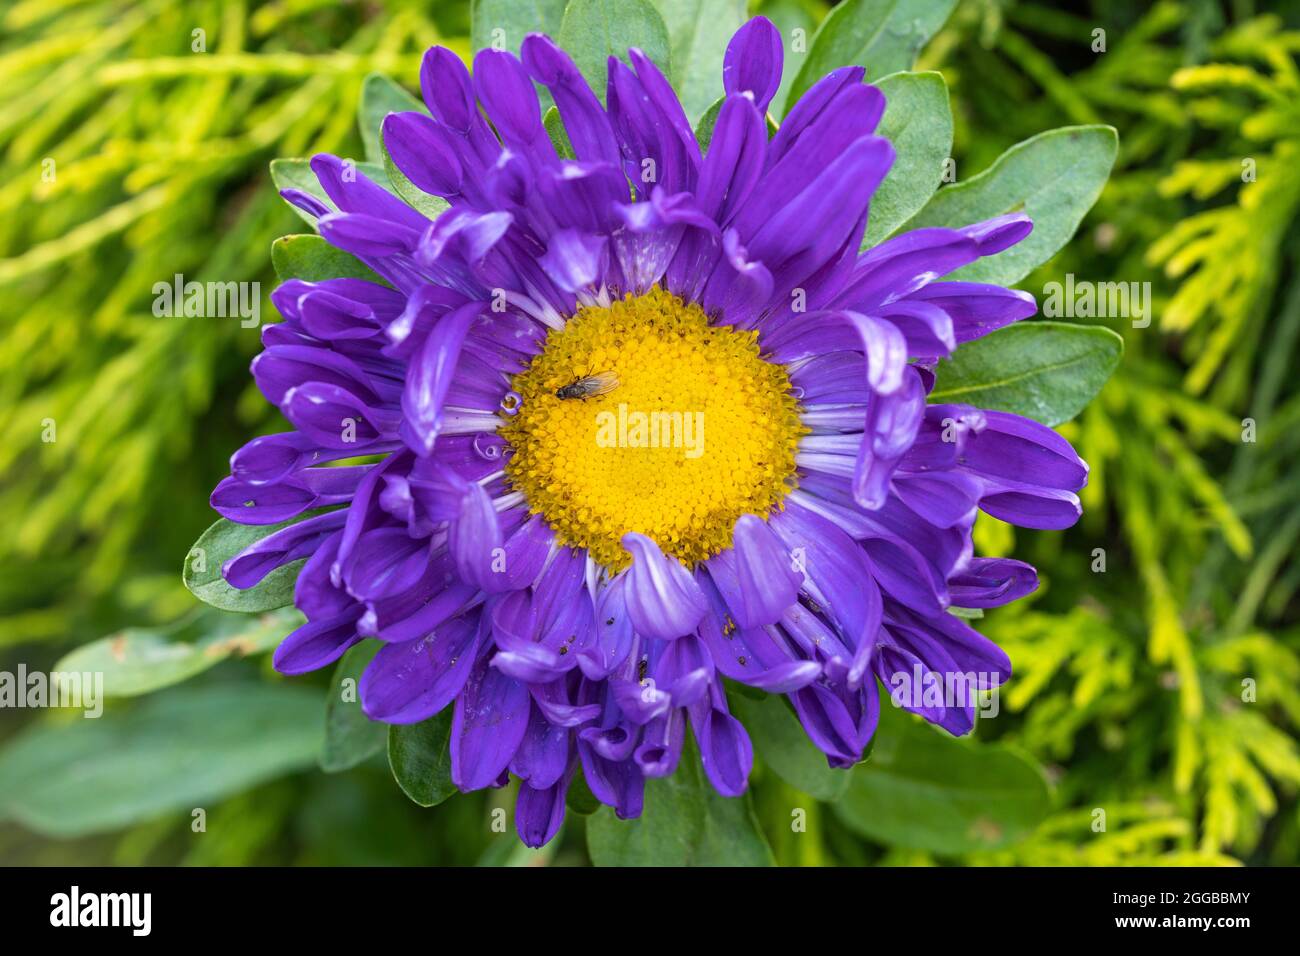 A lilac / purple coloured China Aster (Callistephus chinensis) with a yellow centre growing in an English garden in Worcestershire in late August, UK Stock Photo